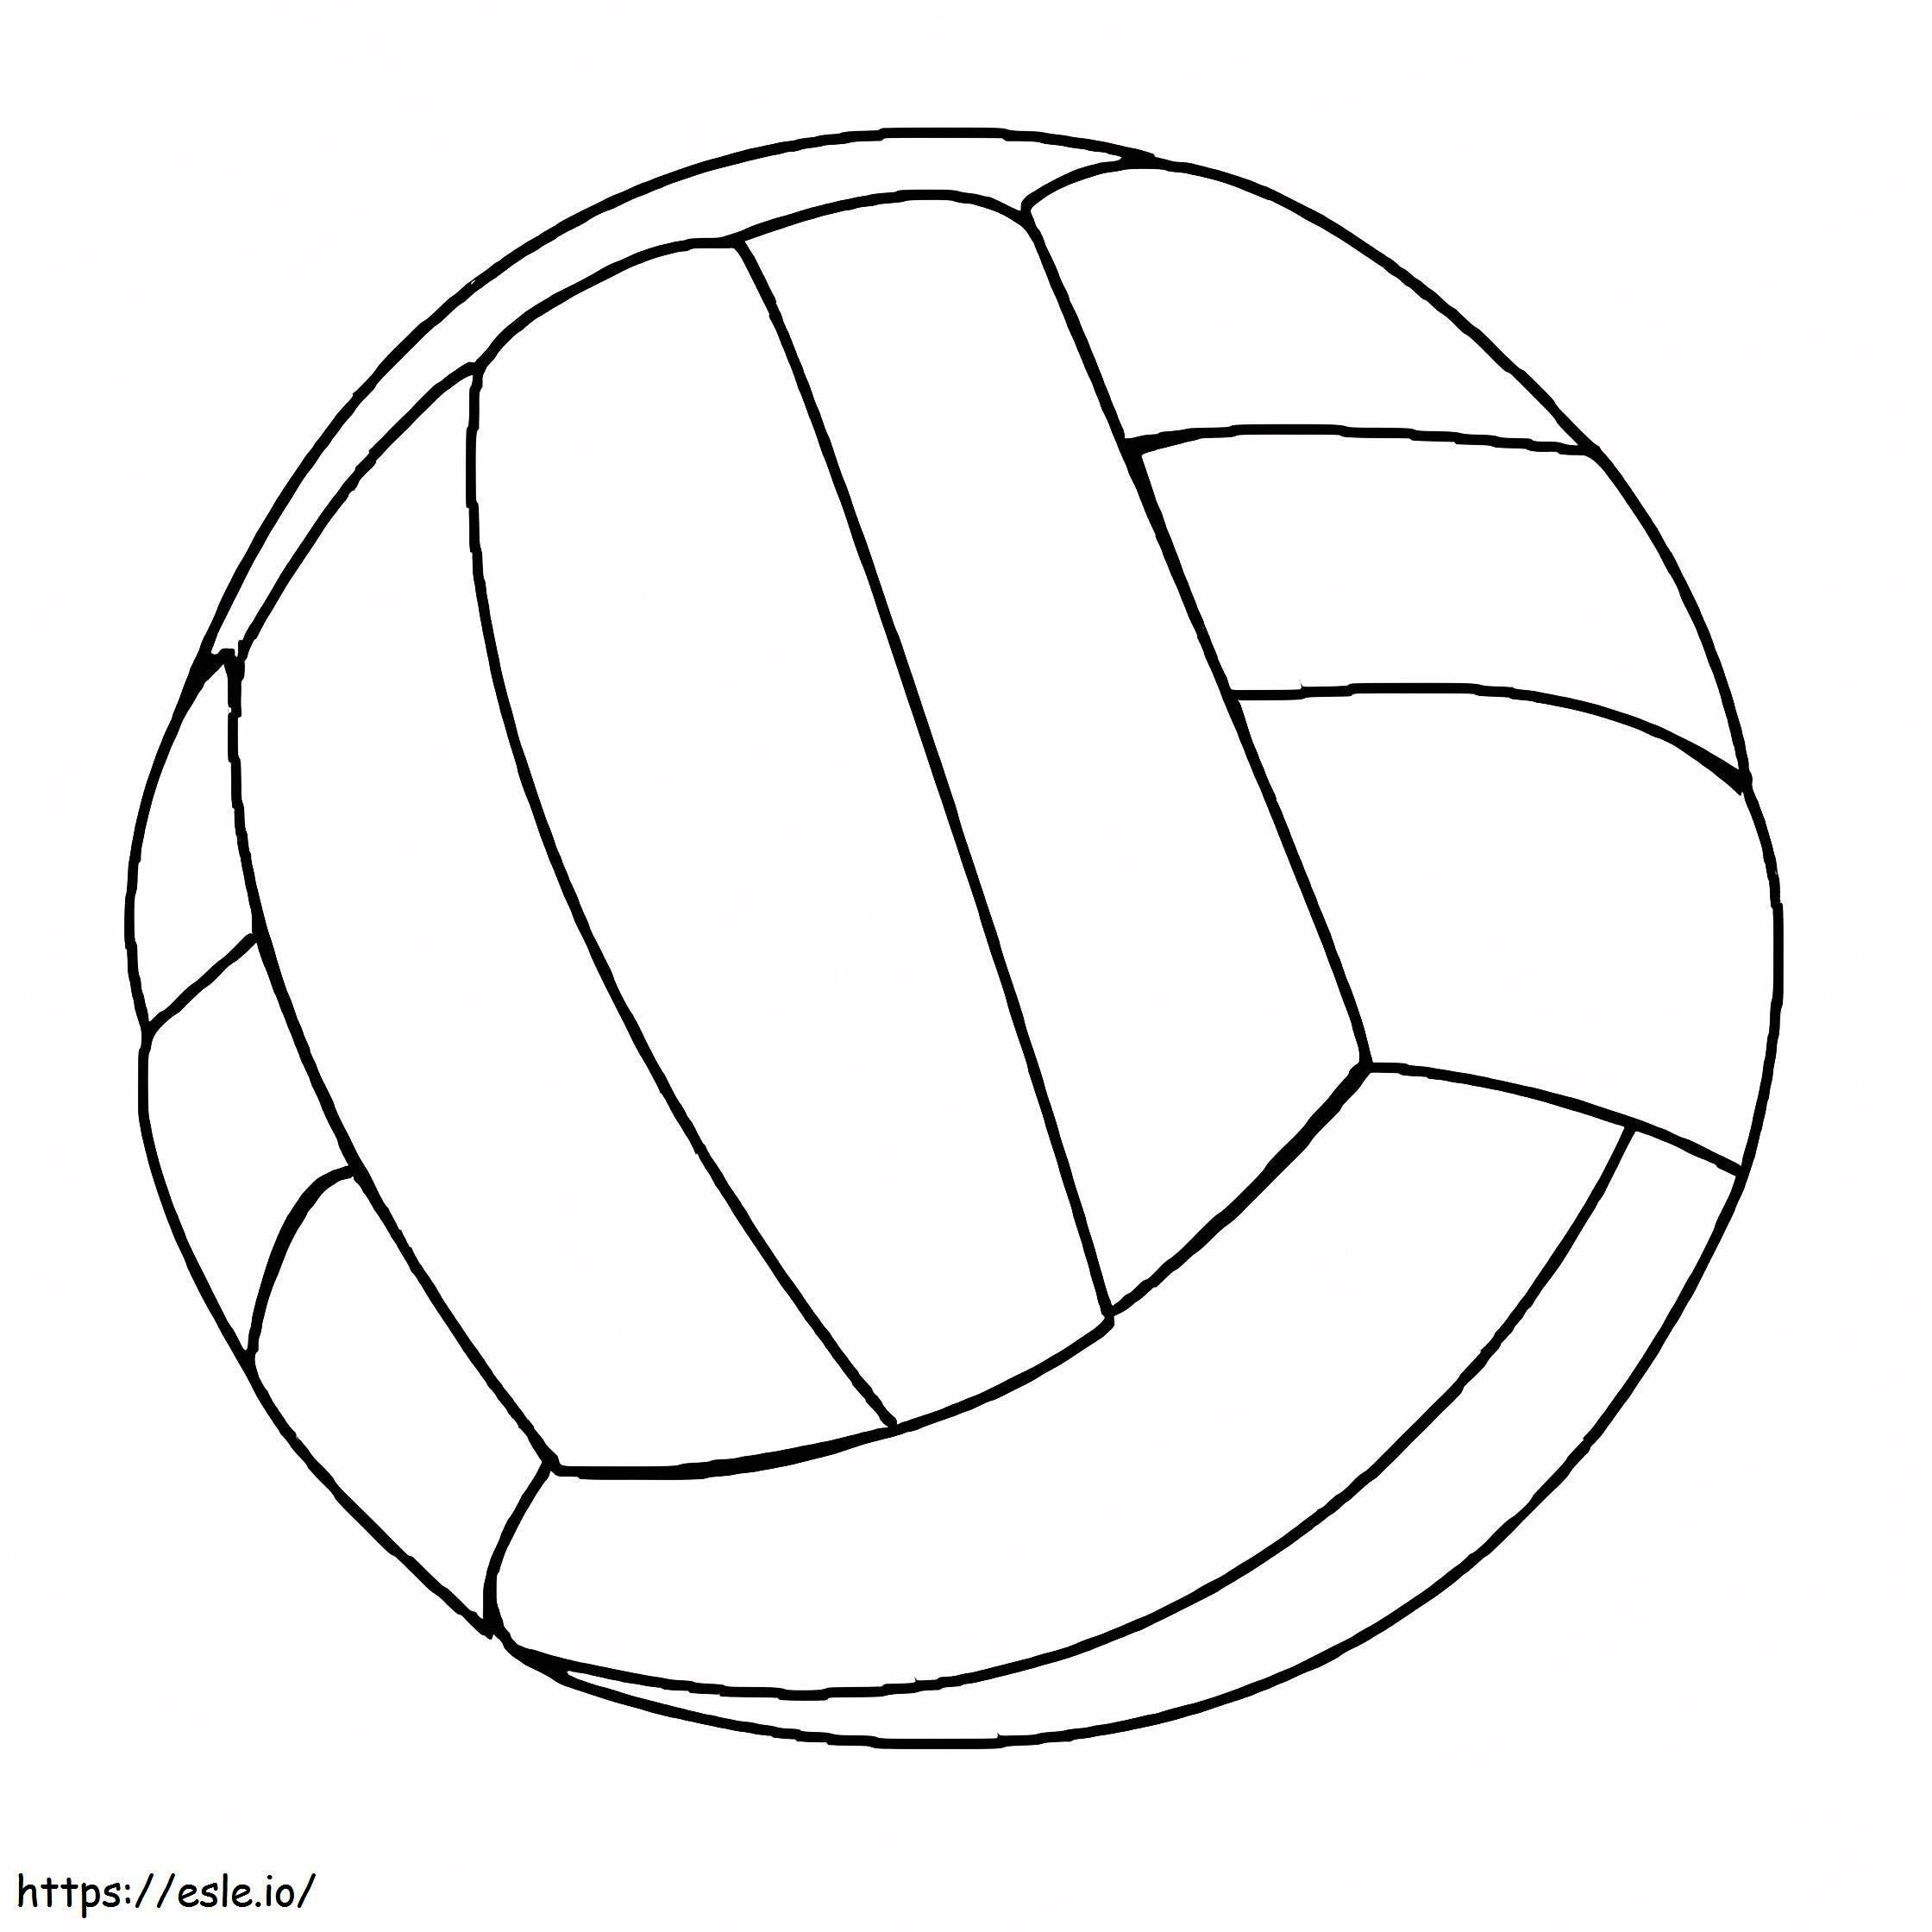 Easy Volleyball Ball coloring page